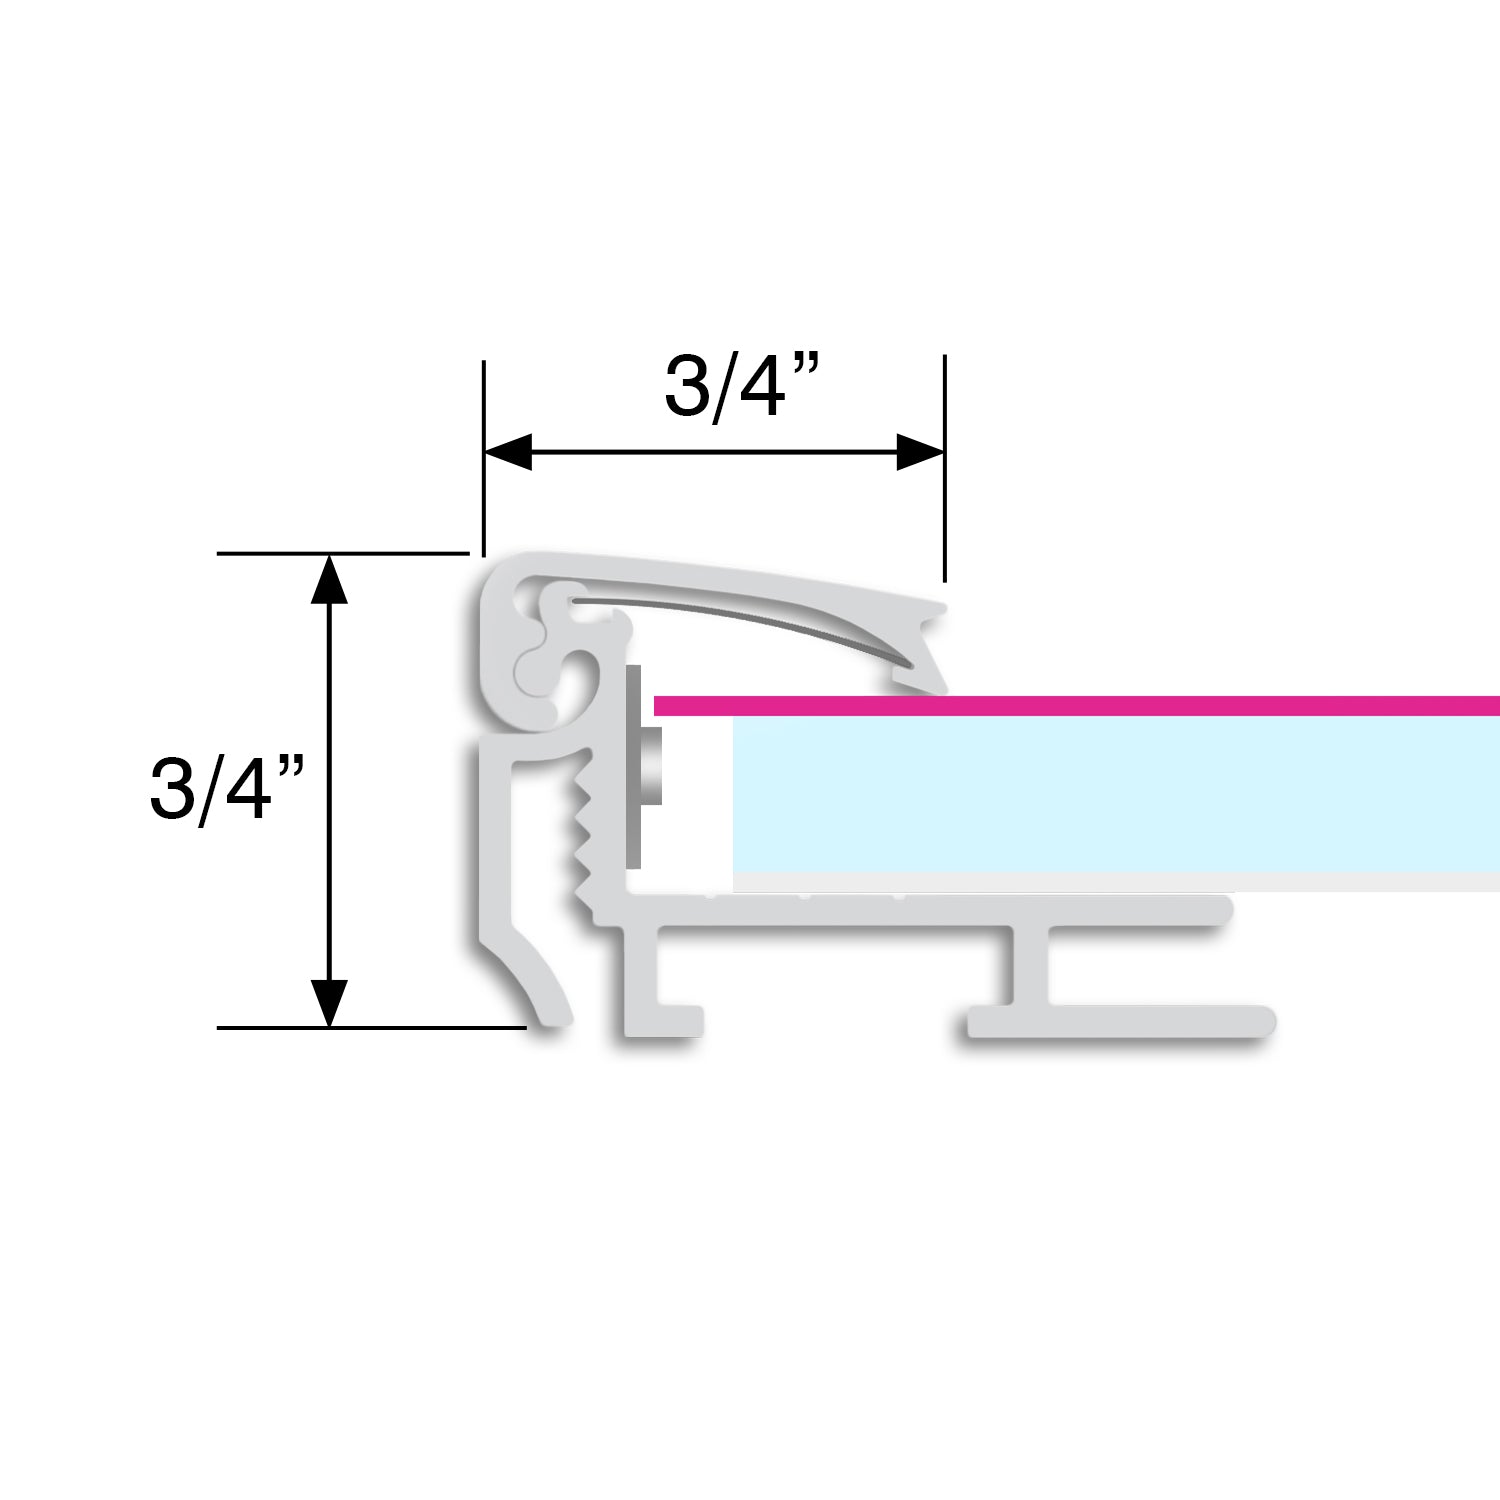 Illustration of how the SupraSlim top can be used to build a lit Snapframe (all other parts must be purchased separately)